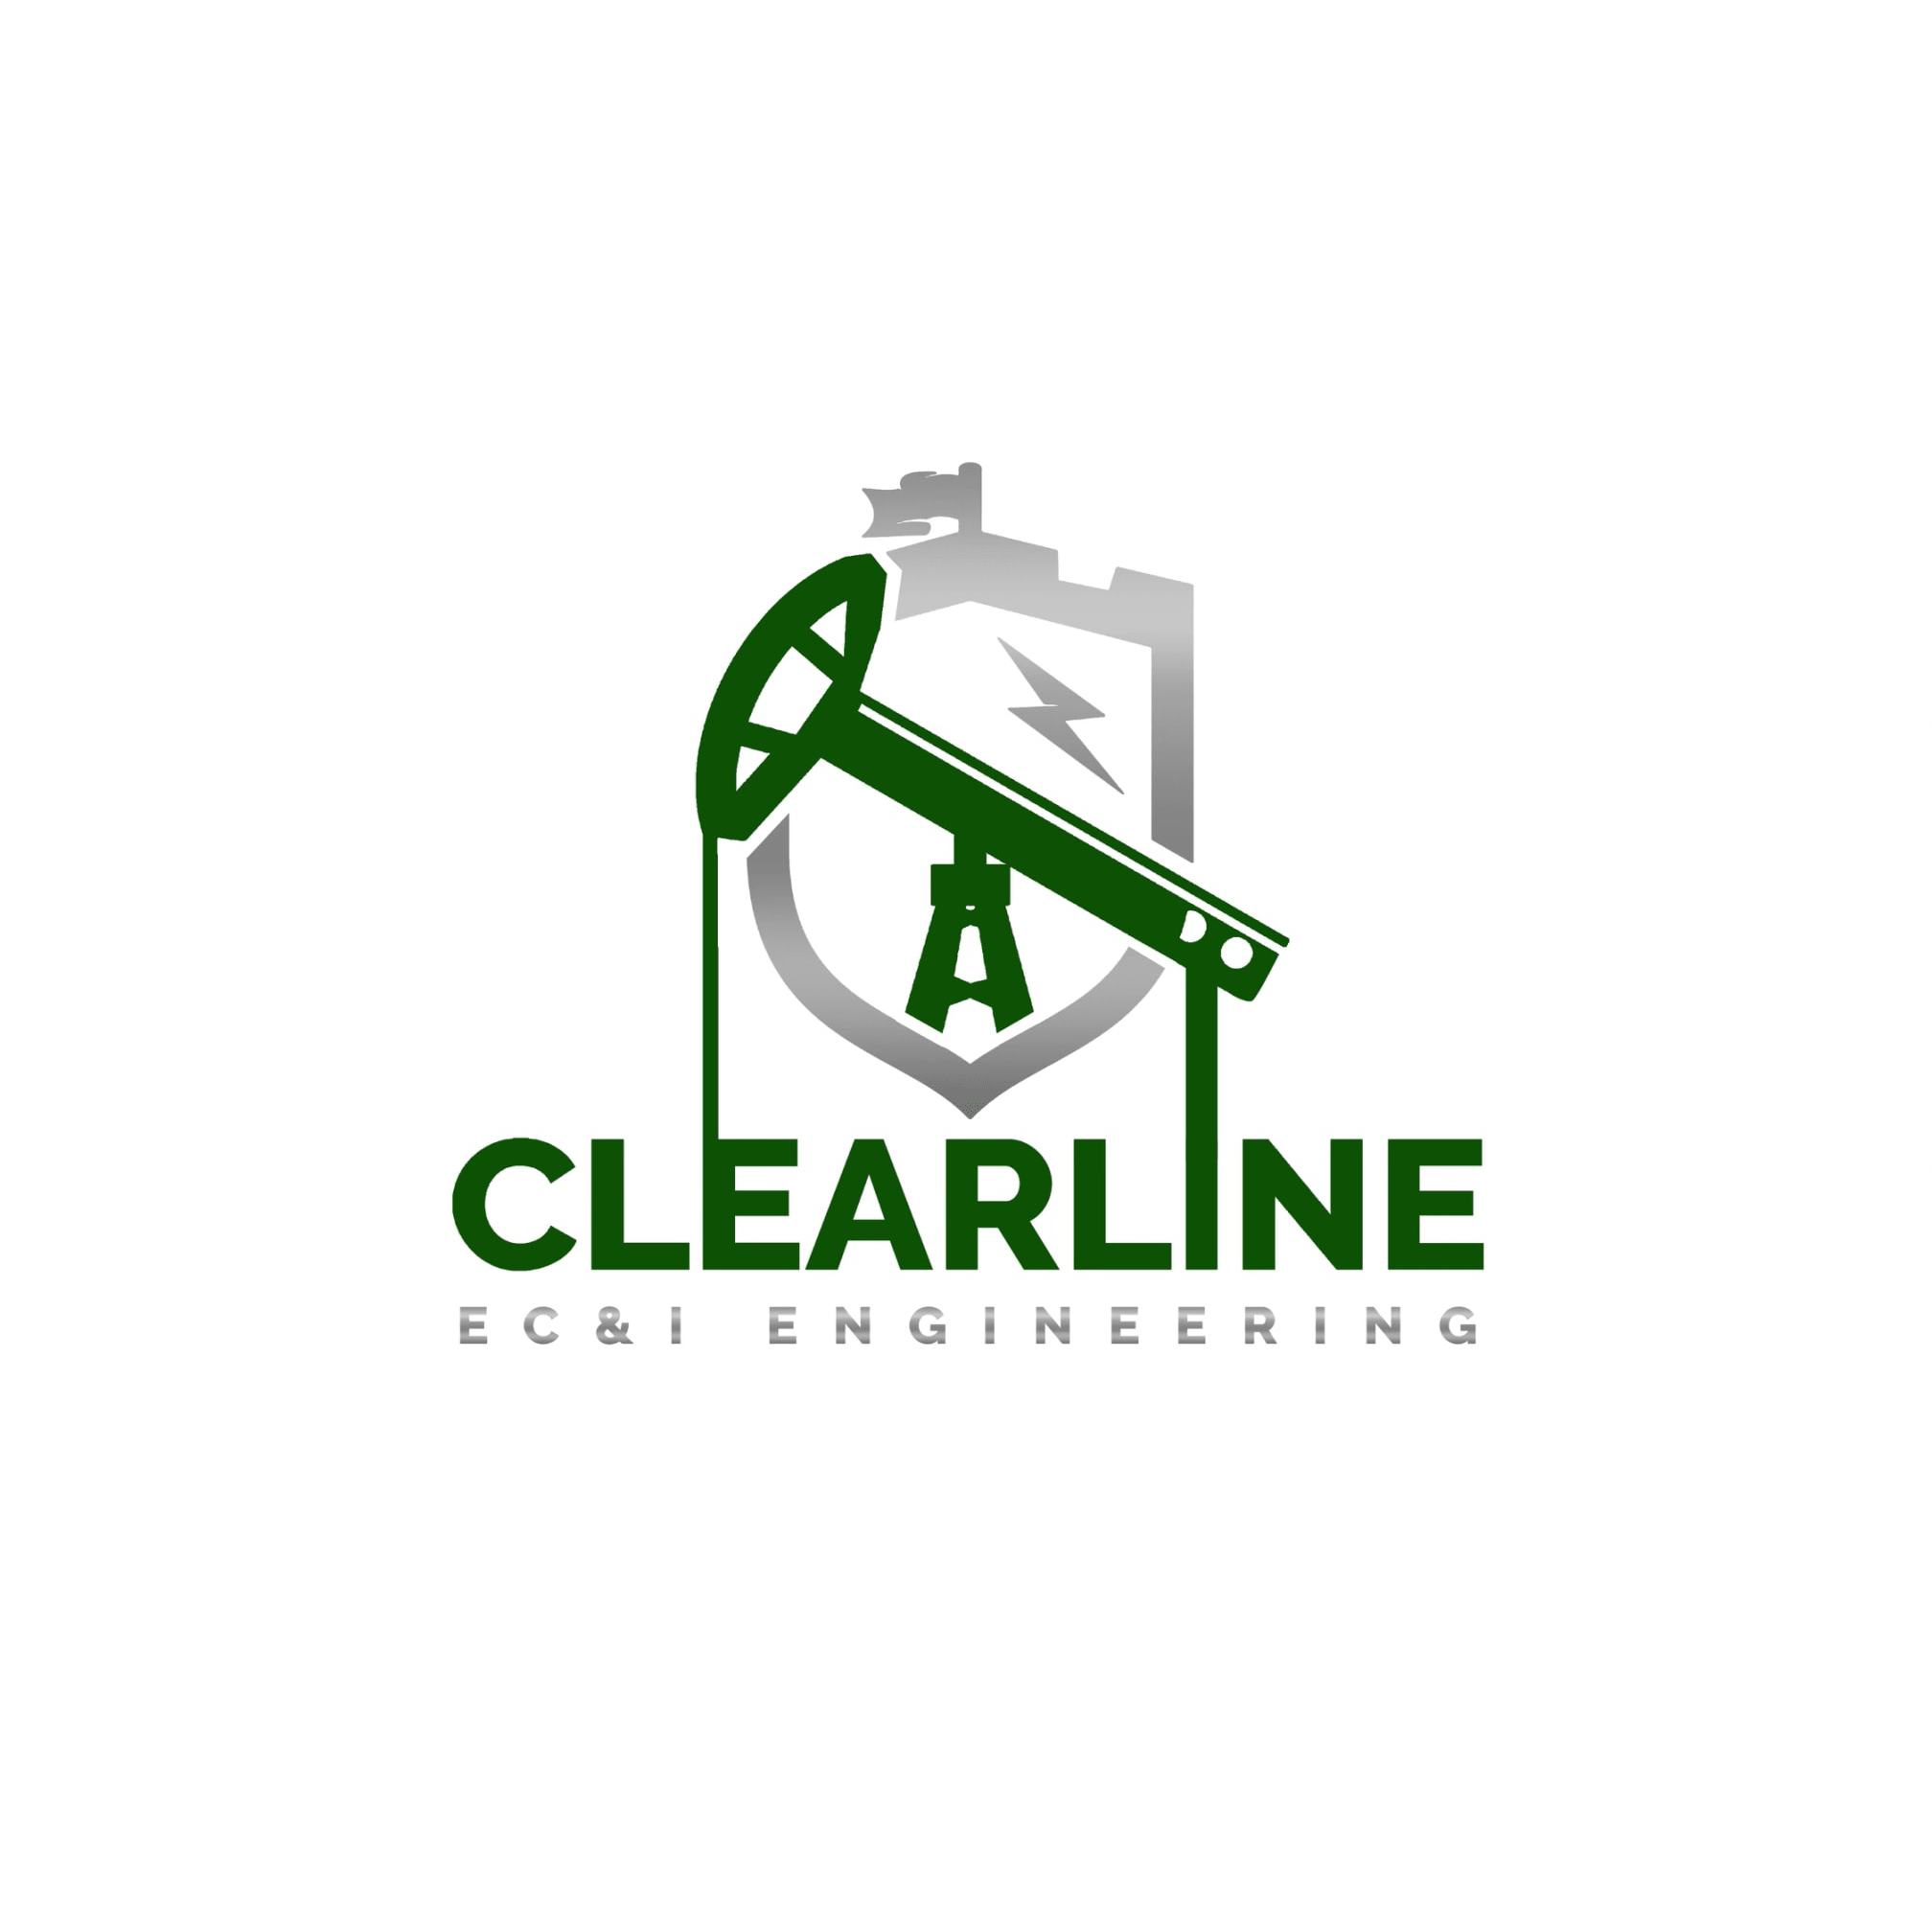 Clearline Ec&I Engineering Ltd - Hull, East Riding of Yorkshire HU10 7BY - 07495 363424 | ShowMeLocal.com